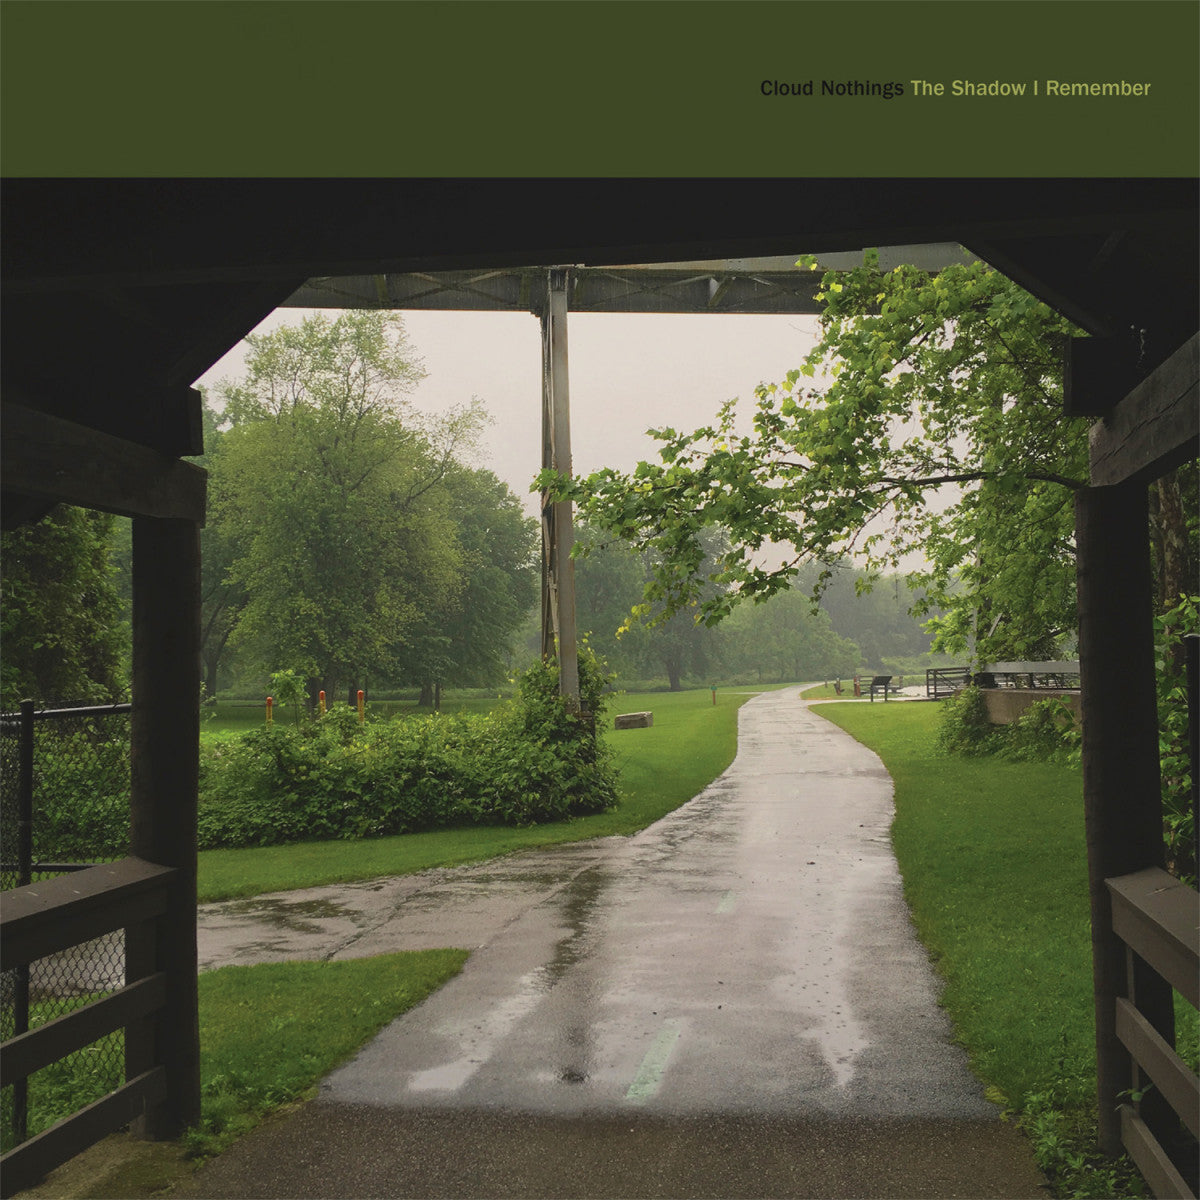 Cloud Nothings - The Shadow I Remember (Spectral Light Whirl Vinyl)